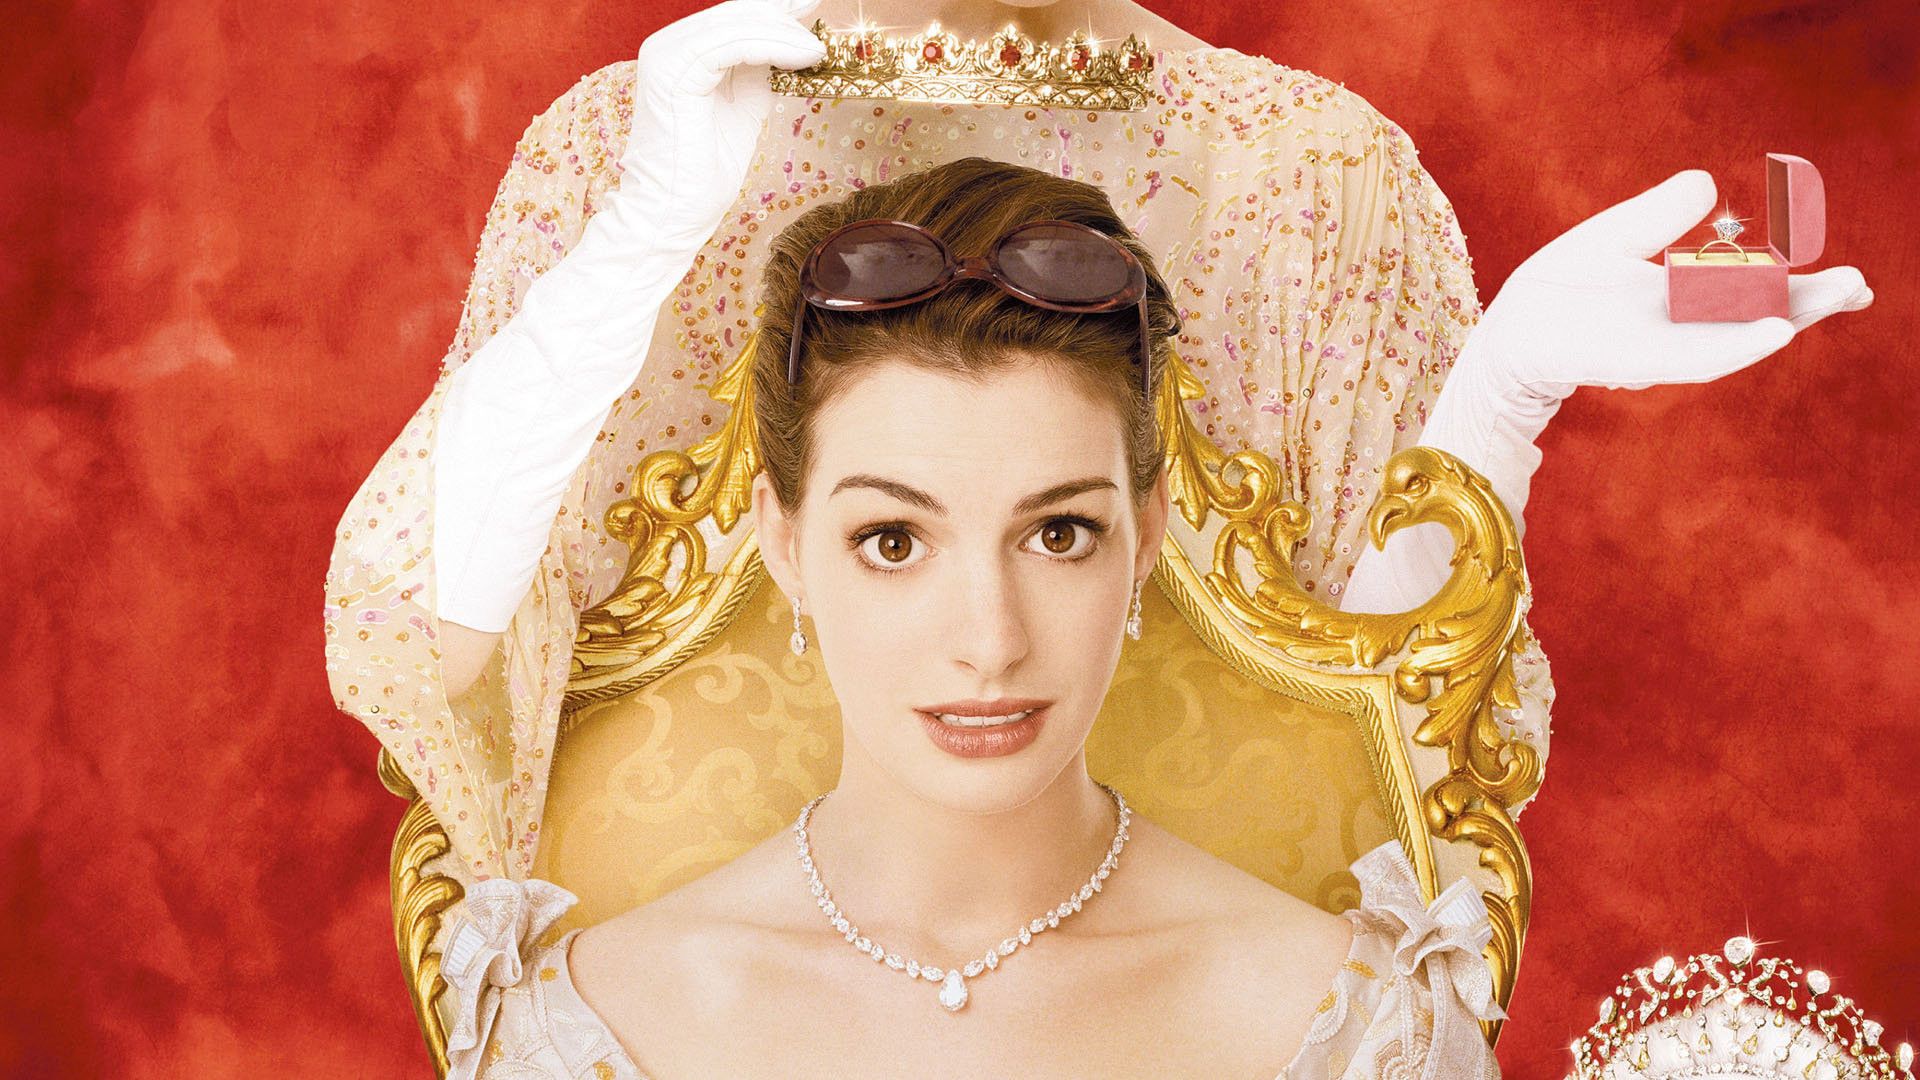 The Princess Diaries 2: Royal Engagement background